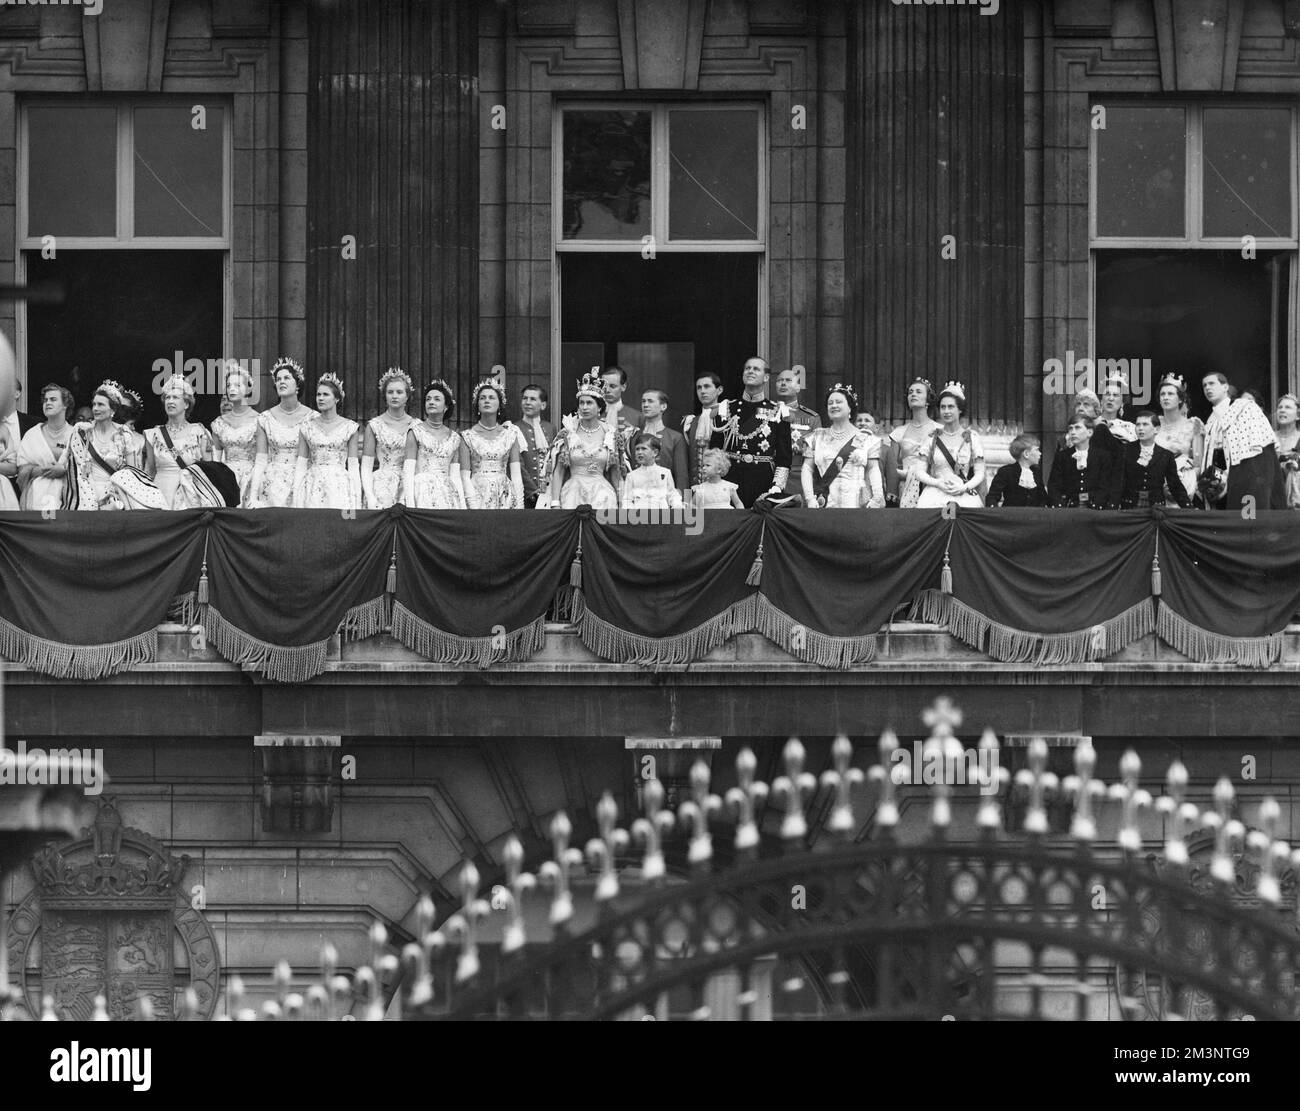 The Queen wearing the imperial crown, members of the royal family, and maids of honour, on the balcony at the palace for the fly-past of the RAF following her Coronation on 2nd June 1953.     Date: 1953 Stock Photo